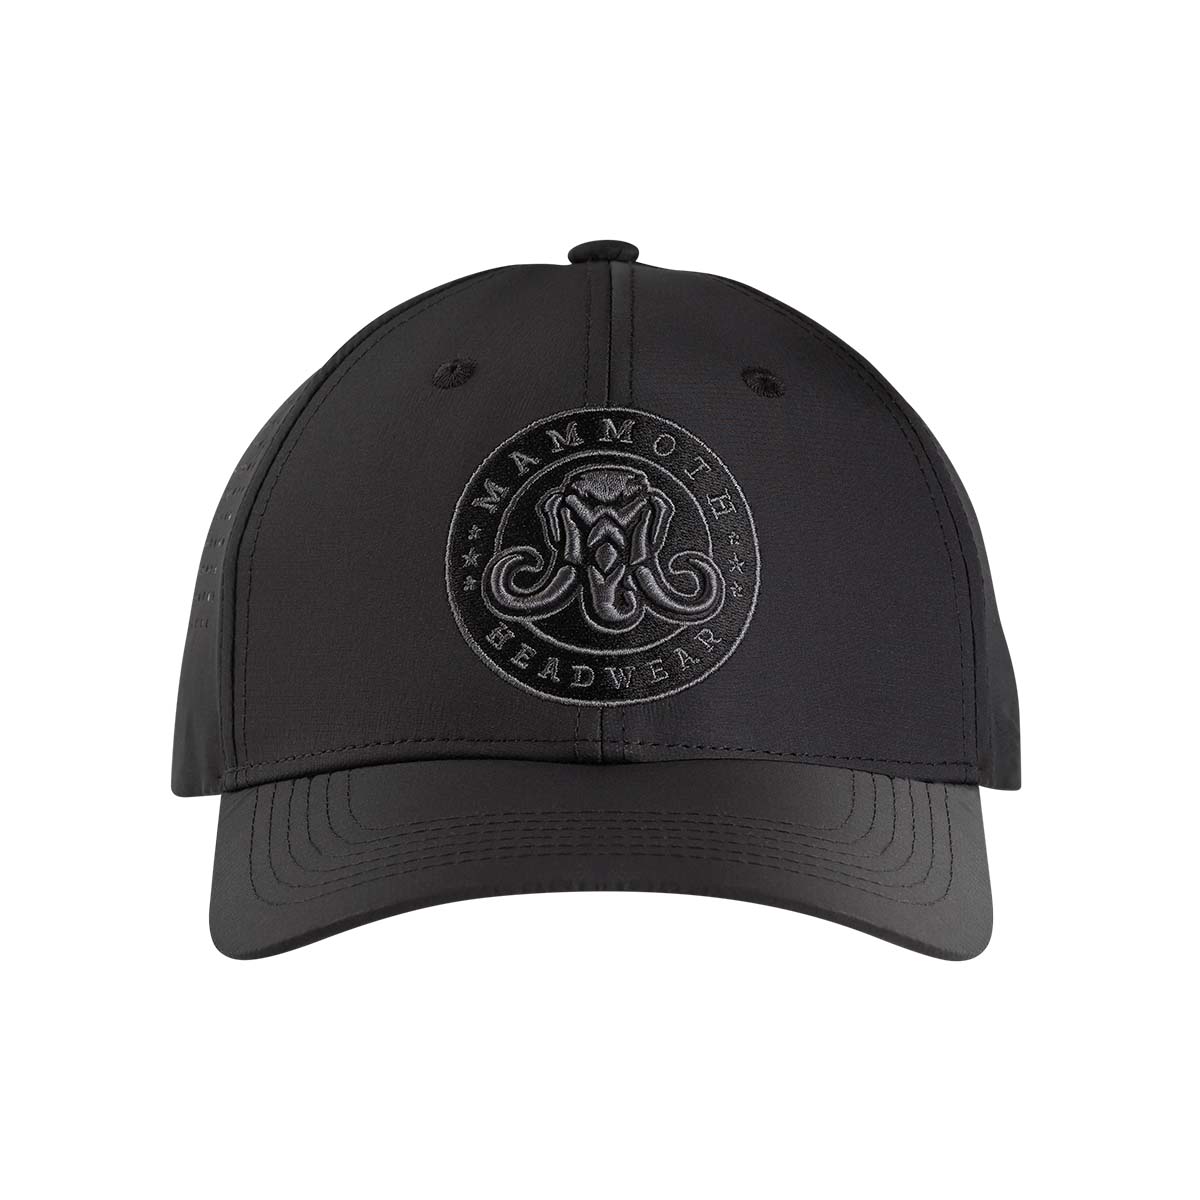 Classic Performance Hat - Blacked Out